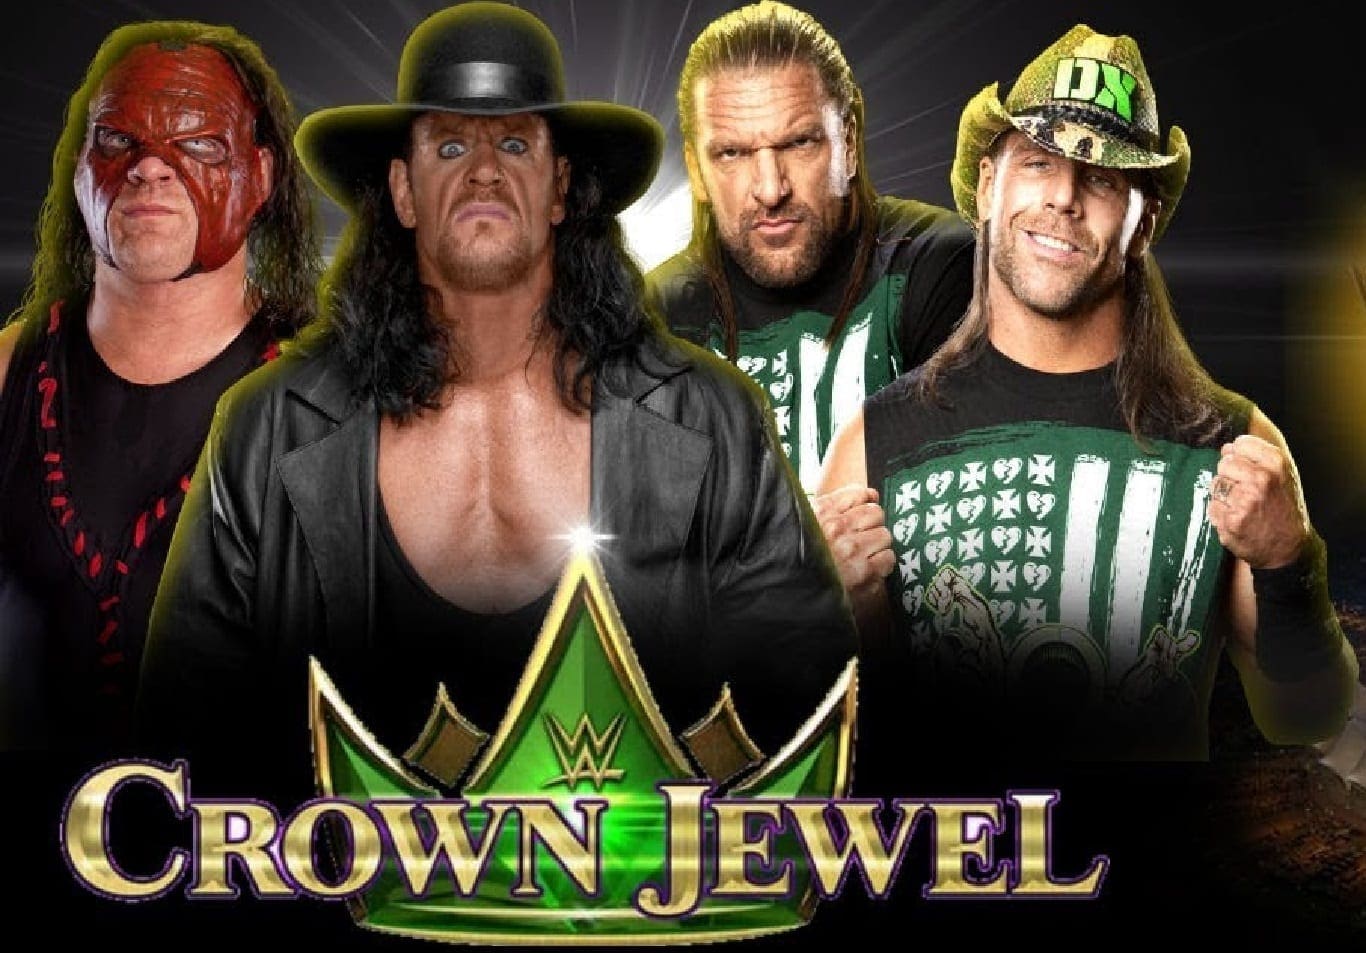 Shawn Michaels & Triple H vs The Undertaker & Kane At WWE Crown Jewel Could Be A Very Long Match